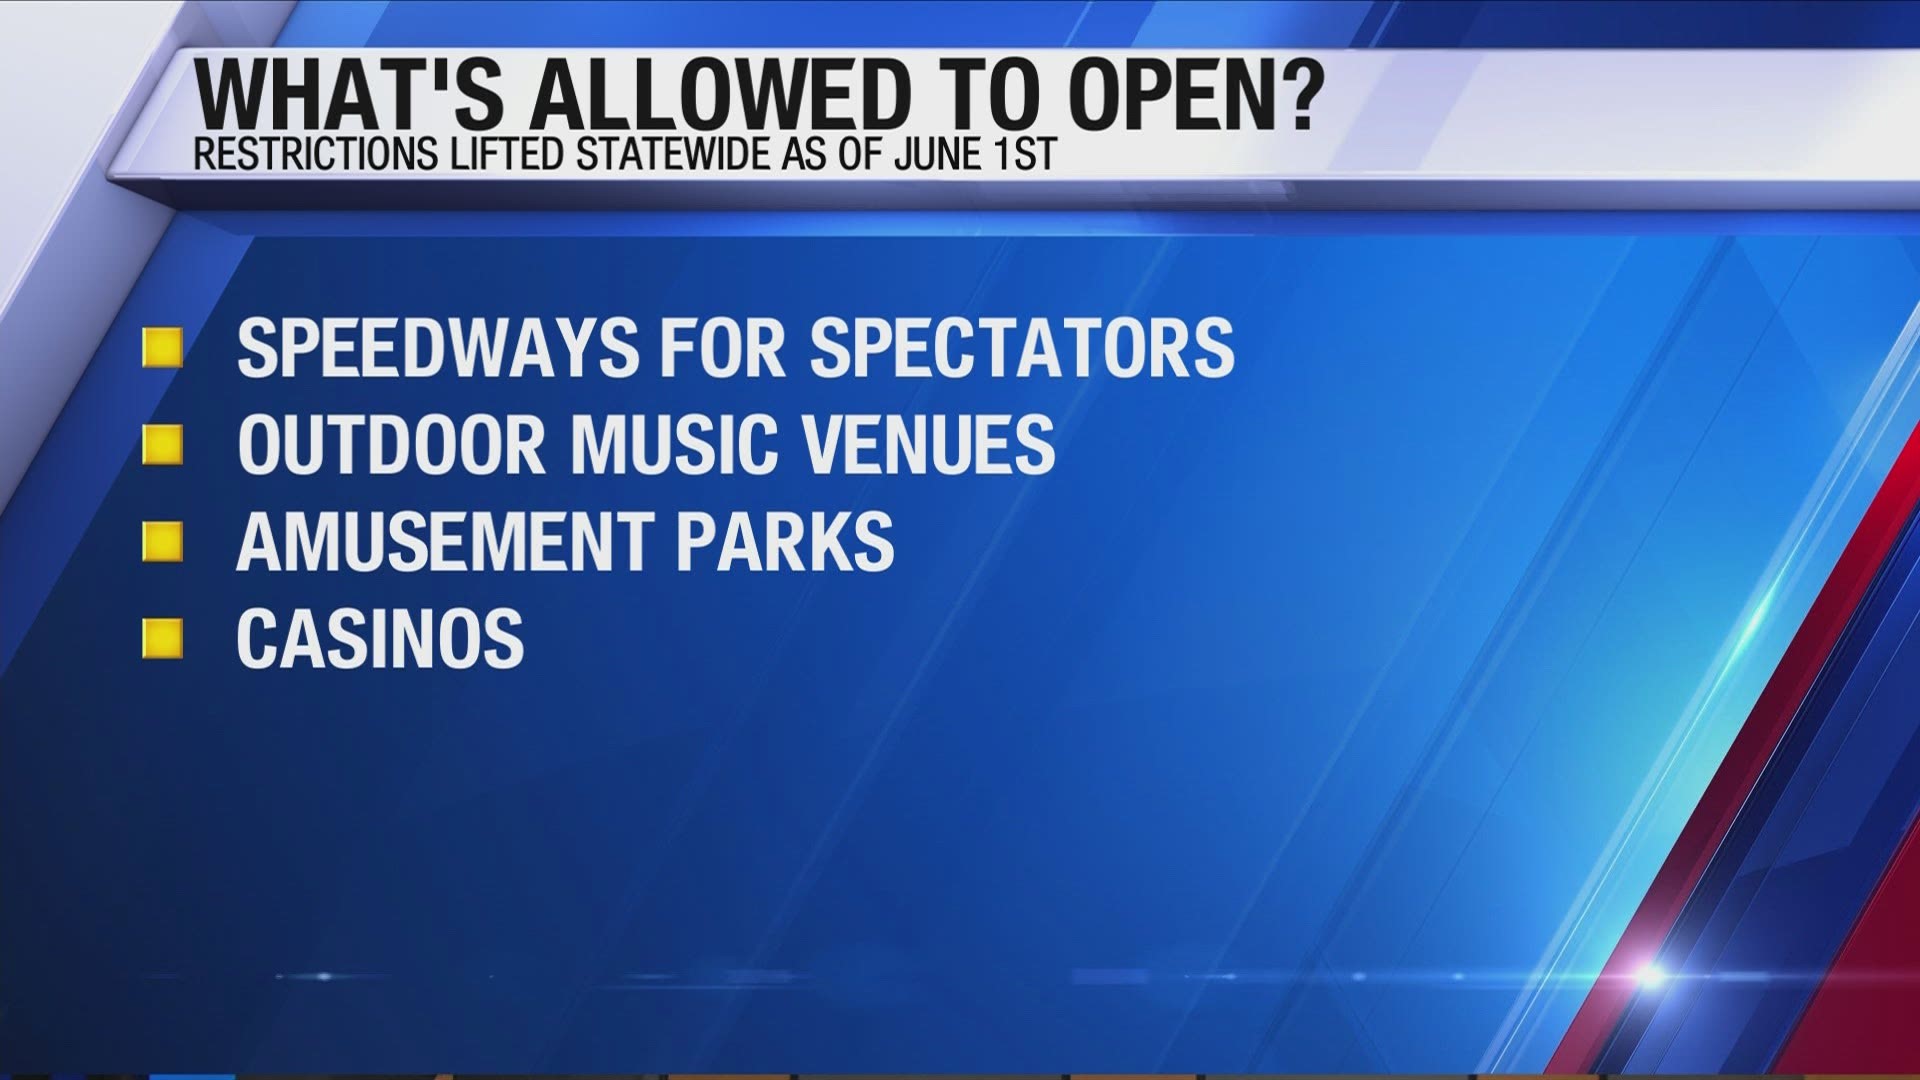 Capacity at places such as bowling alleys, casinos and outdoor performance venues will be limited.